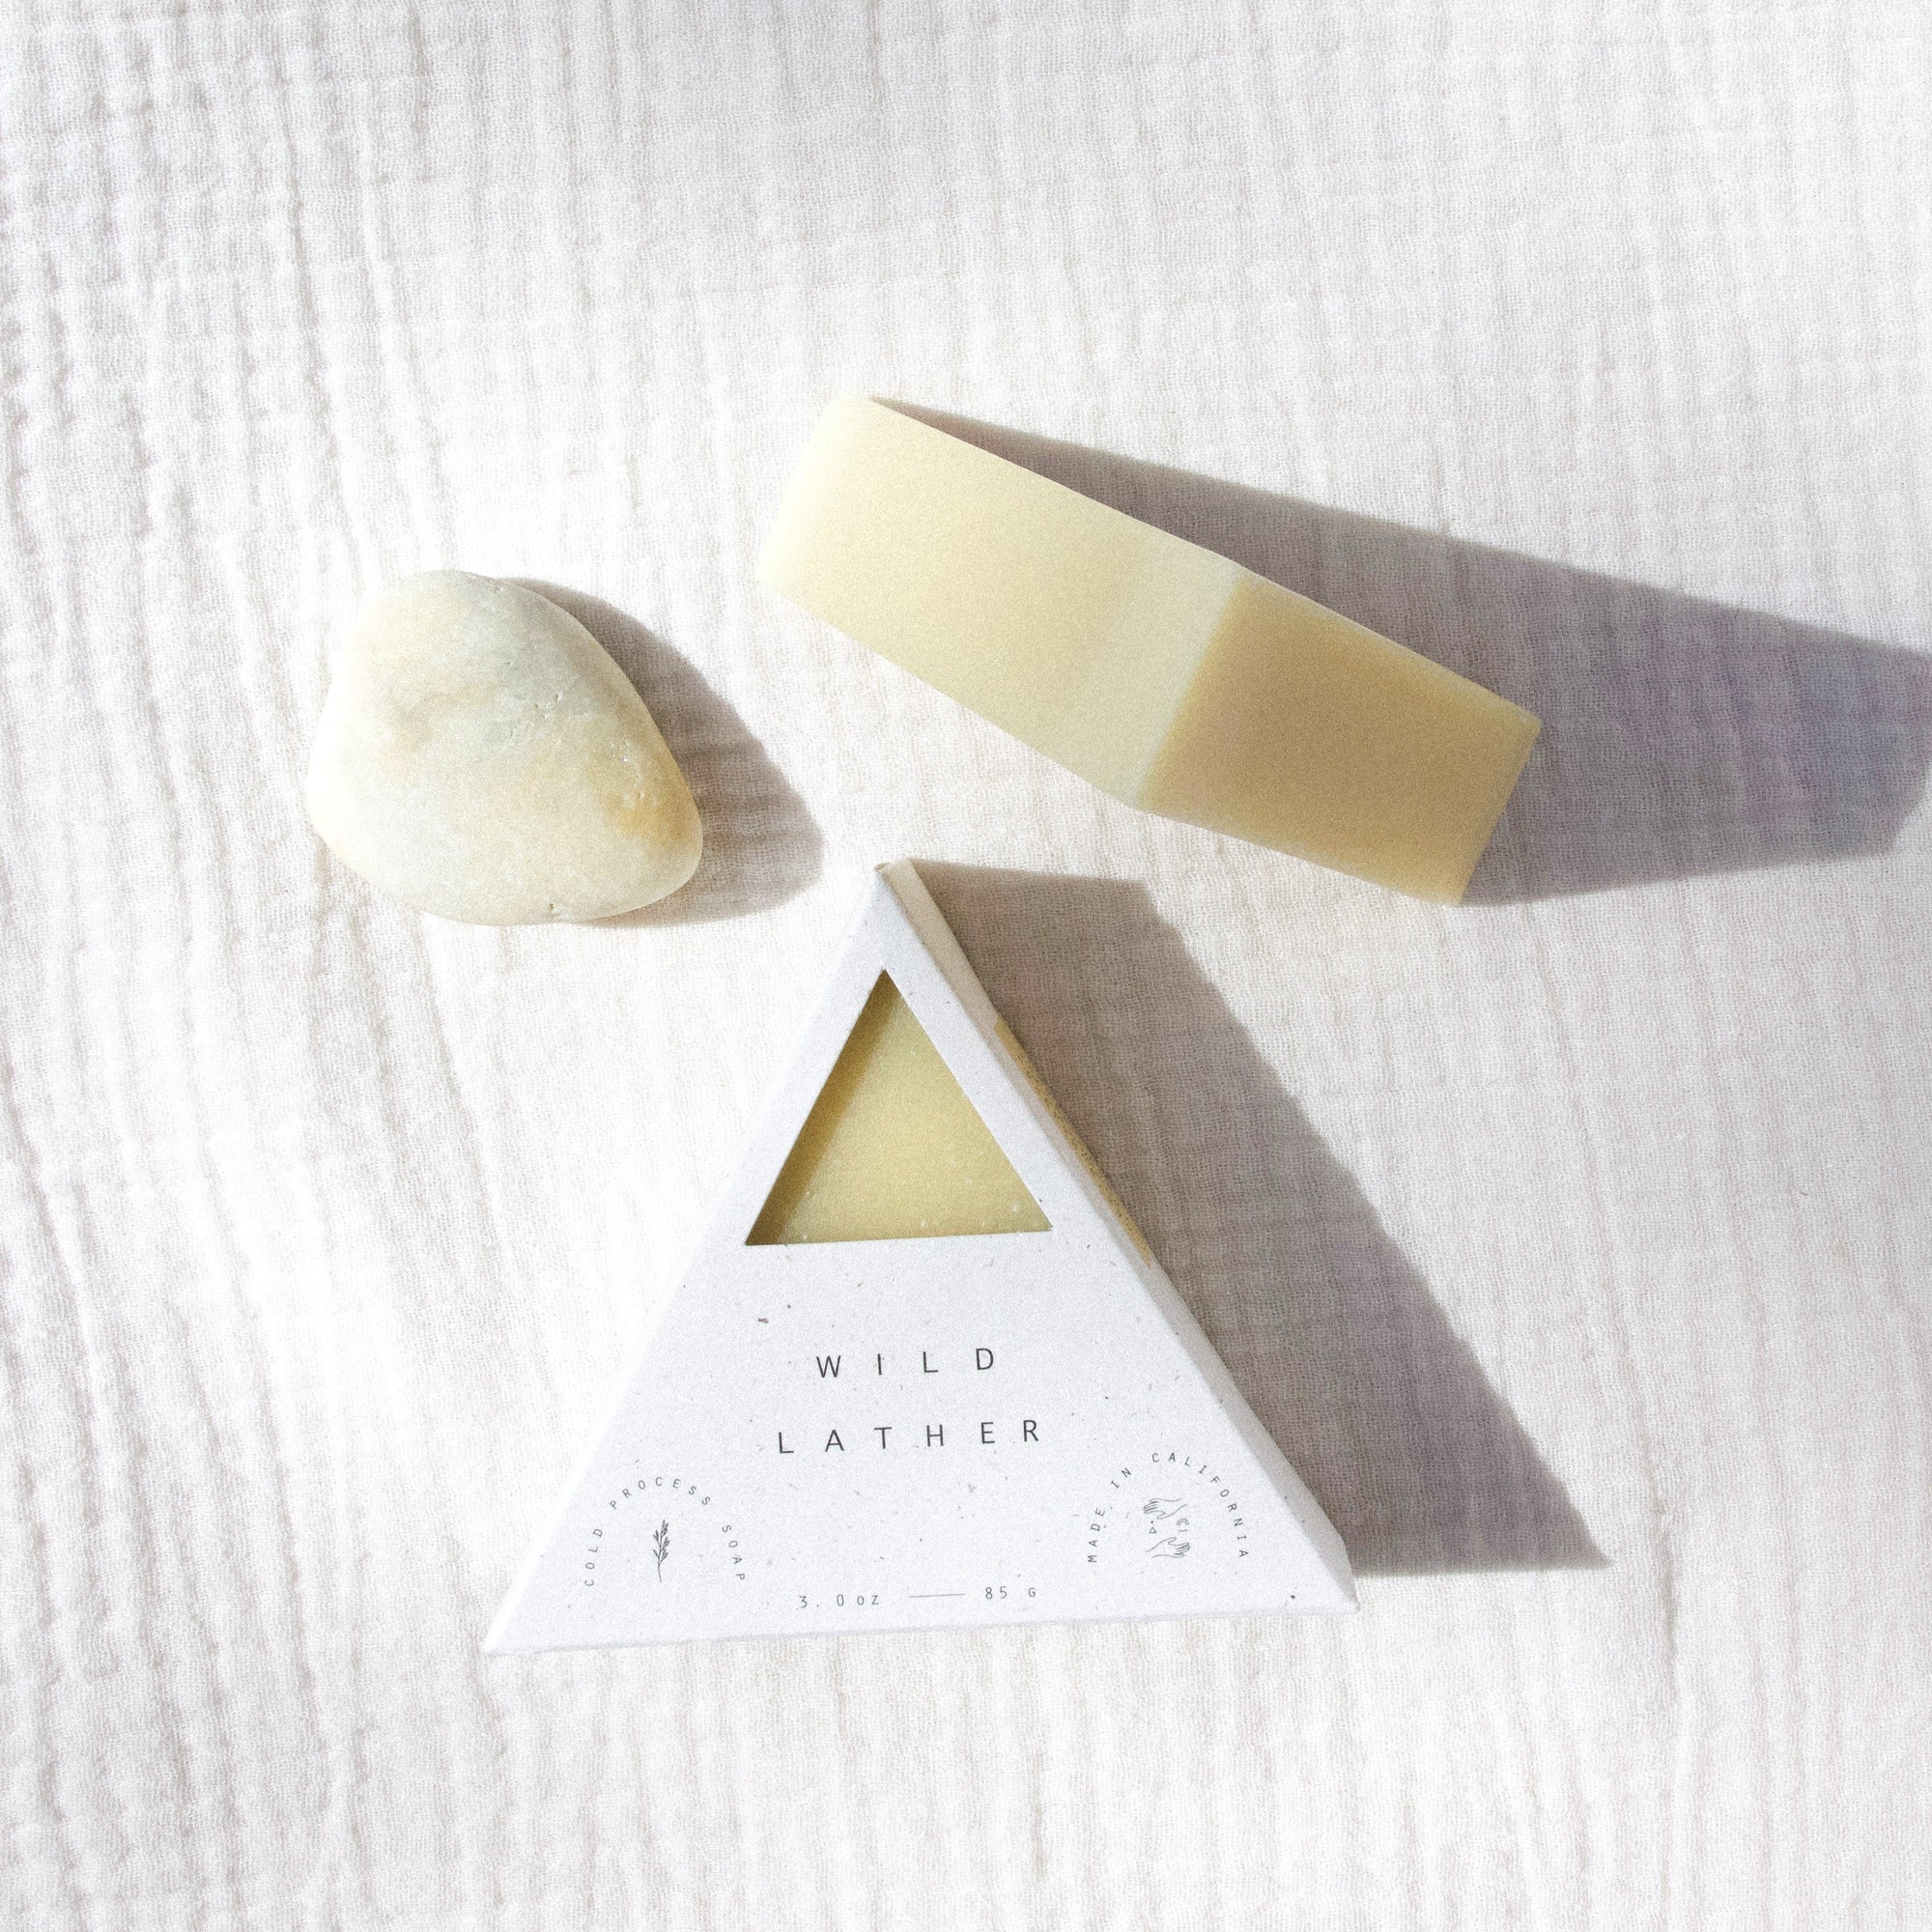 Two triangle soaps and a stone against a textured cream cloth